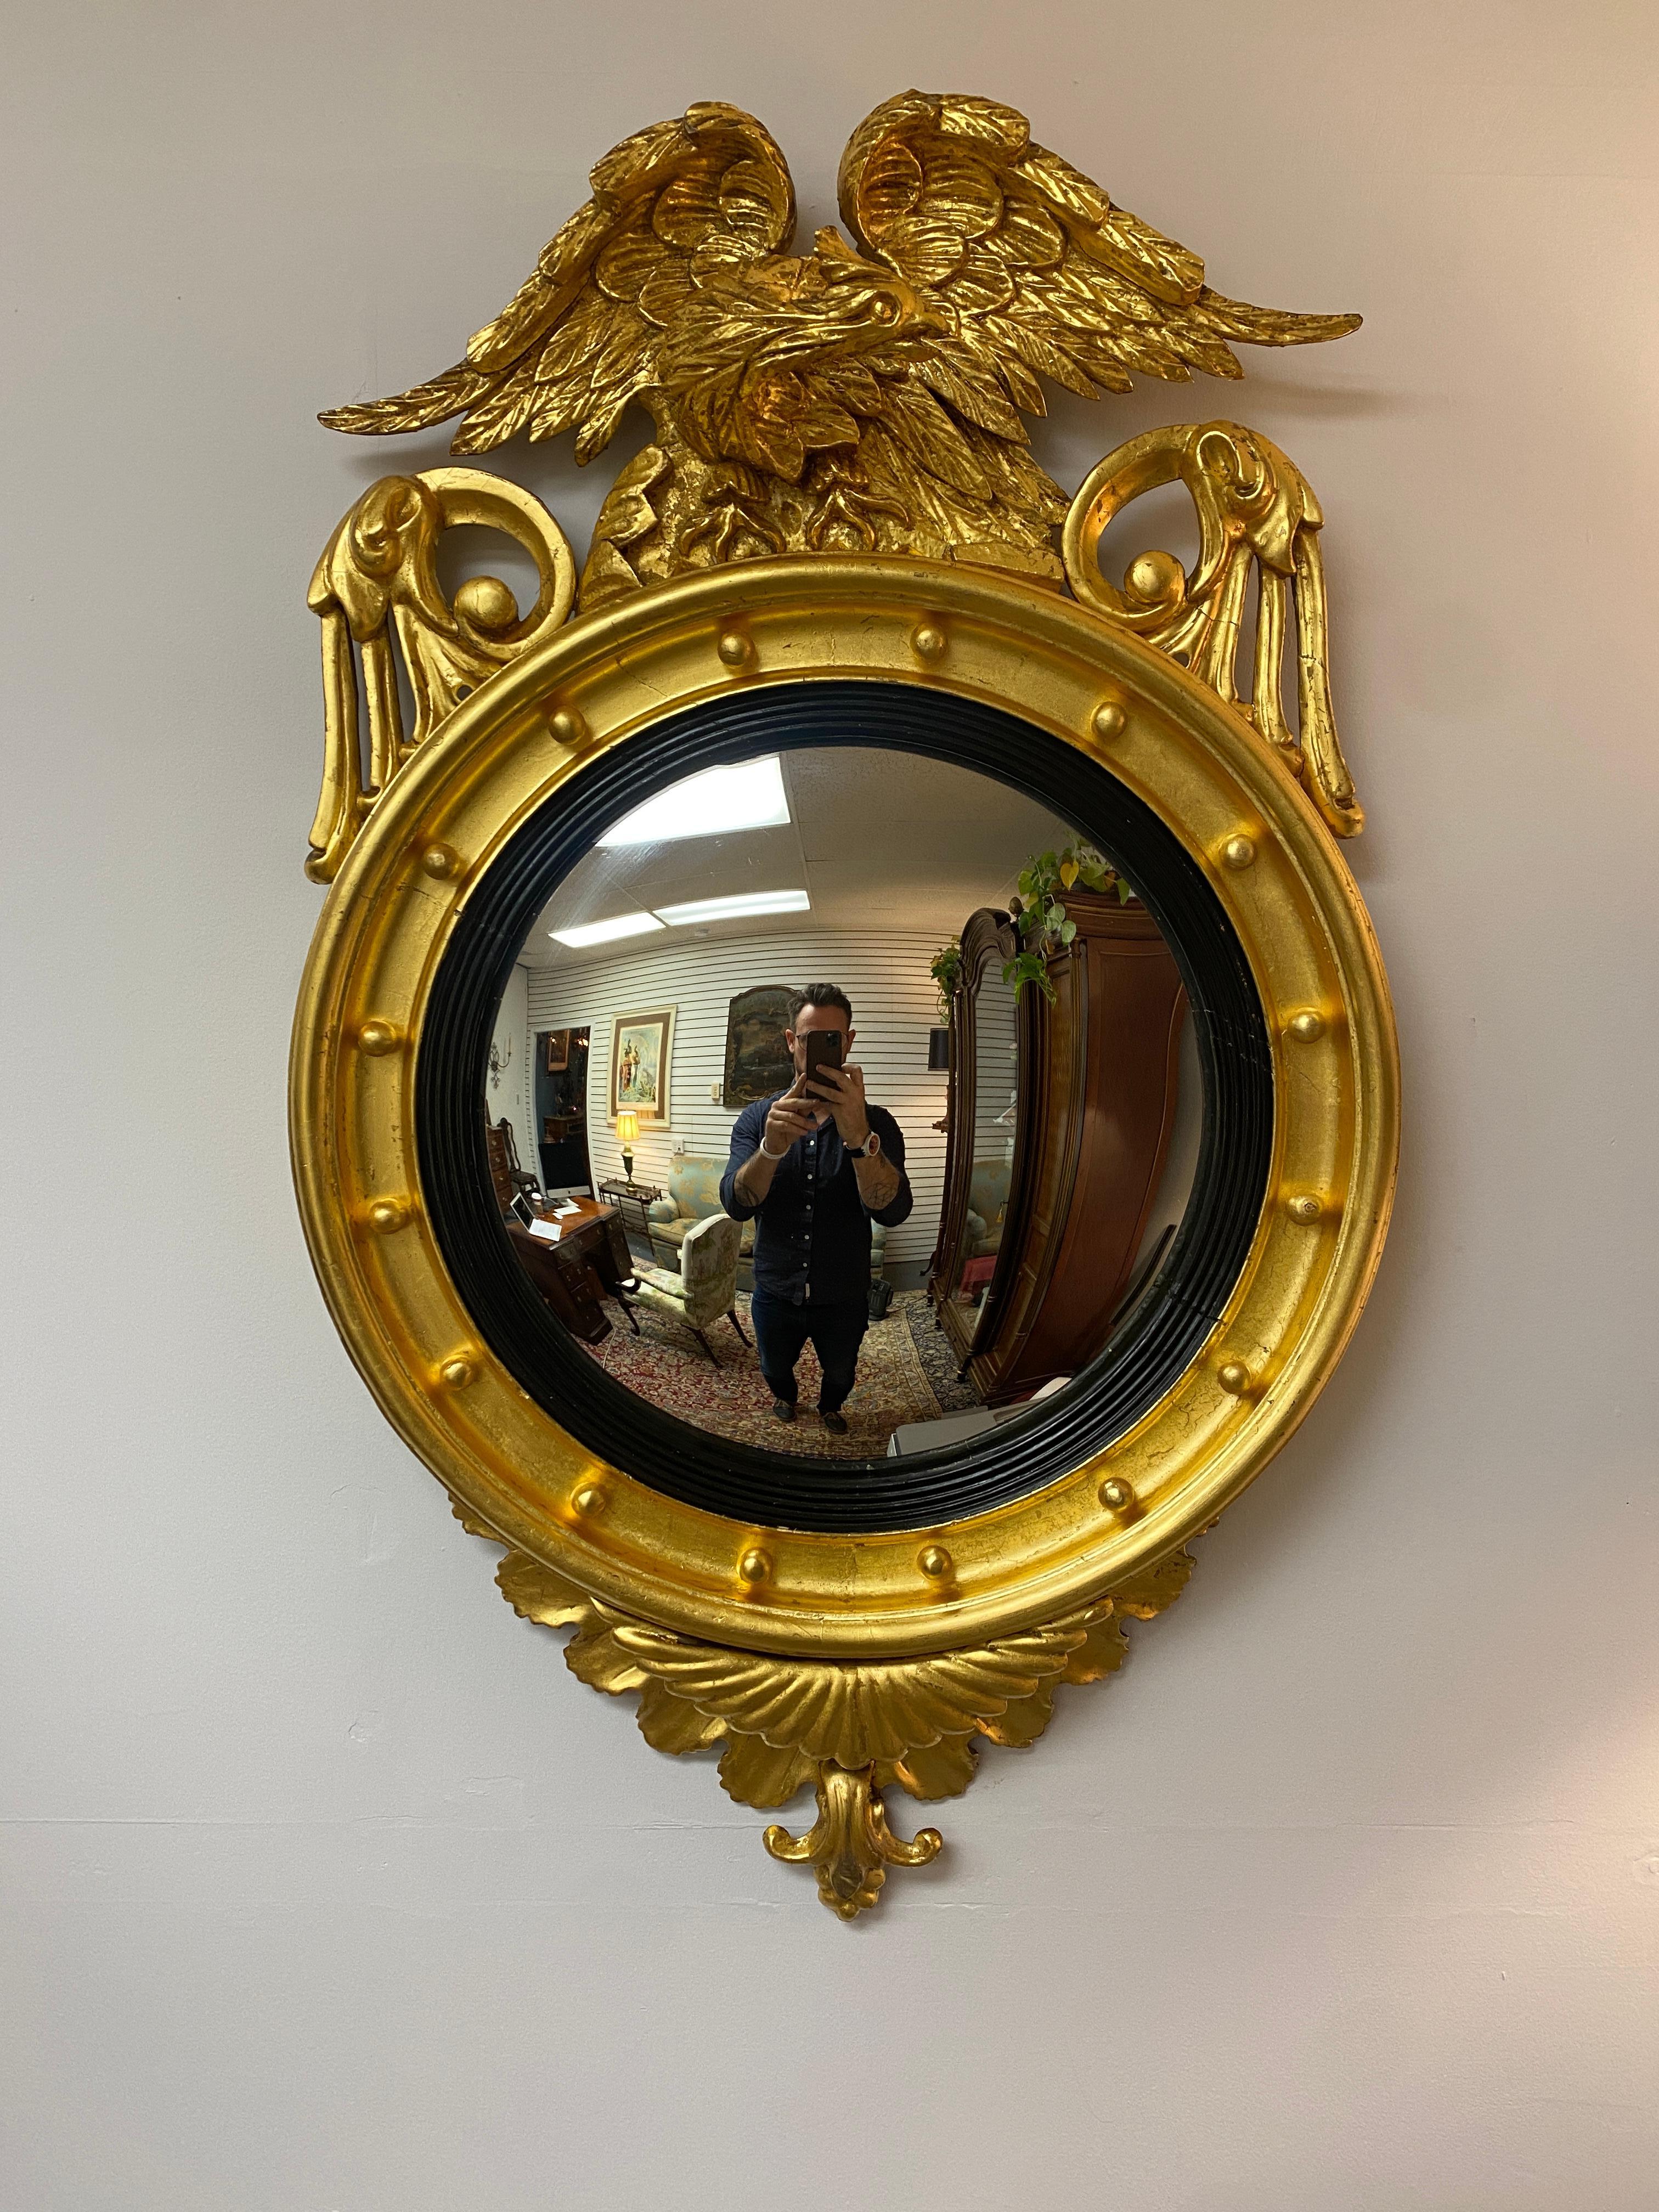 This is a handsome and completely restored American Federal convex bullseye gilt mirror. Features a wood carved perched eagle over flanking acanthus foliage, interior circular spheres, ebonized reeded ring, and terminating at bottom with acanthus